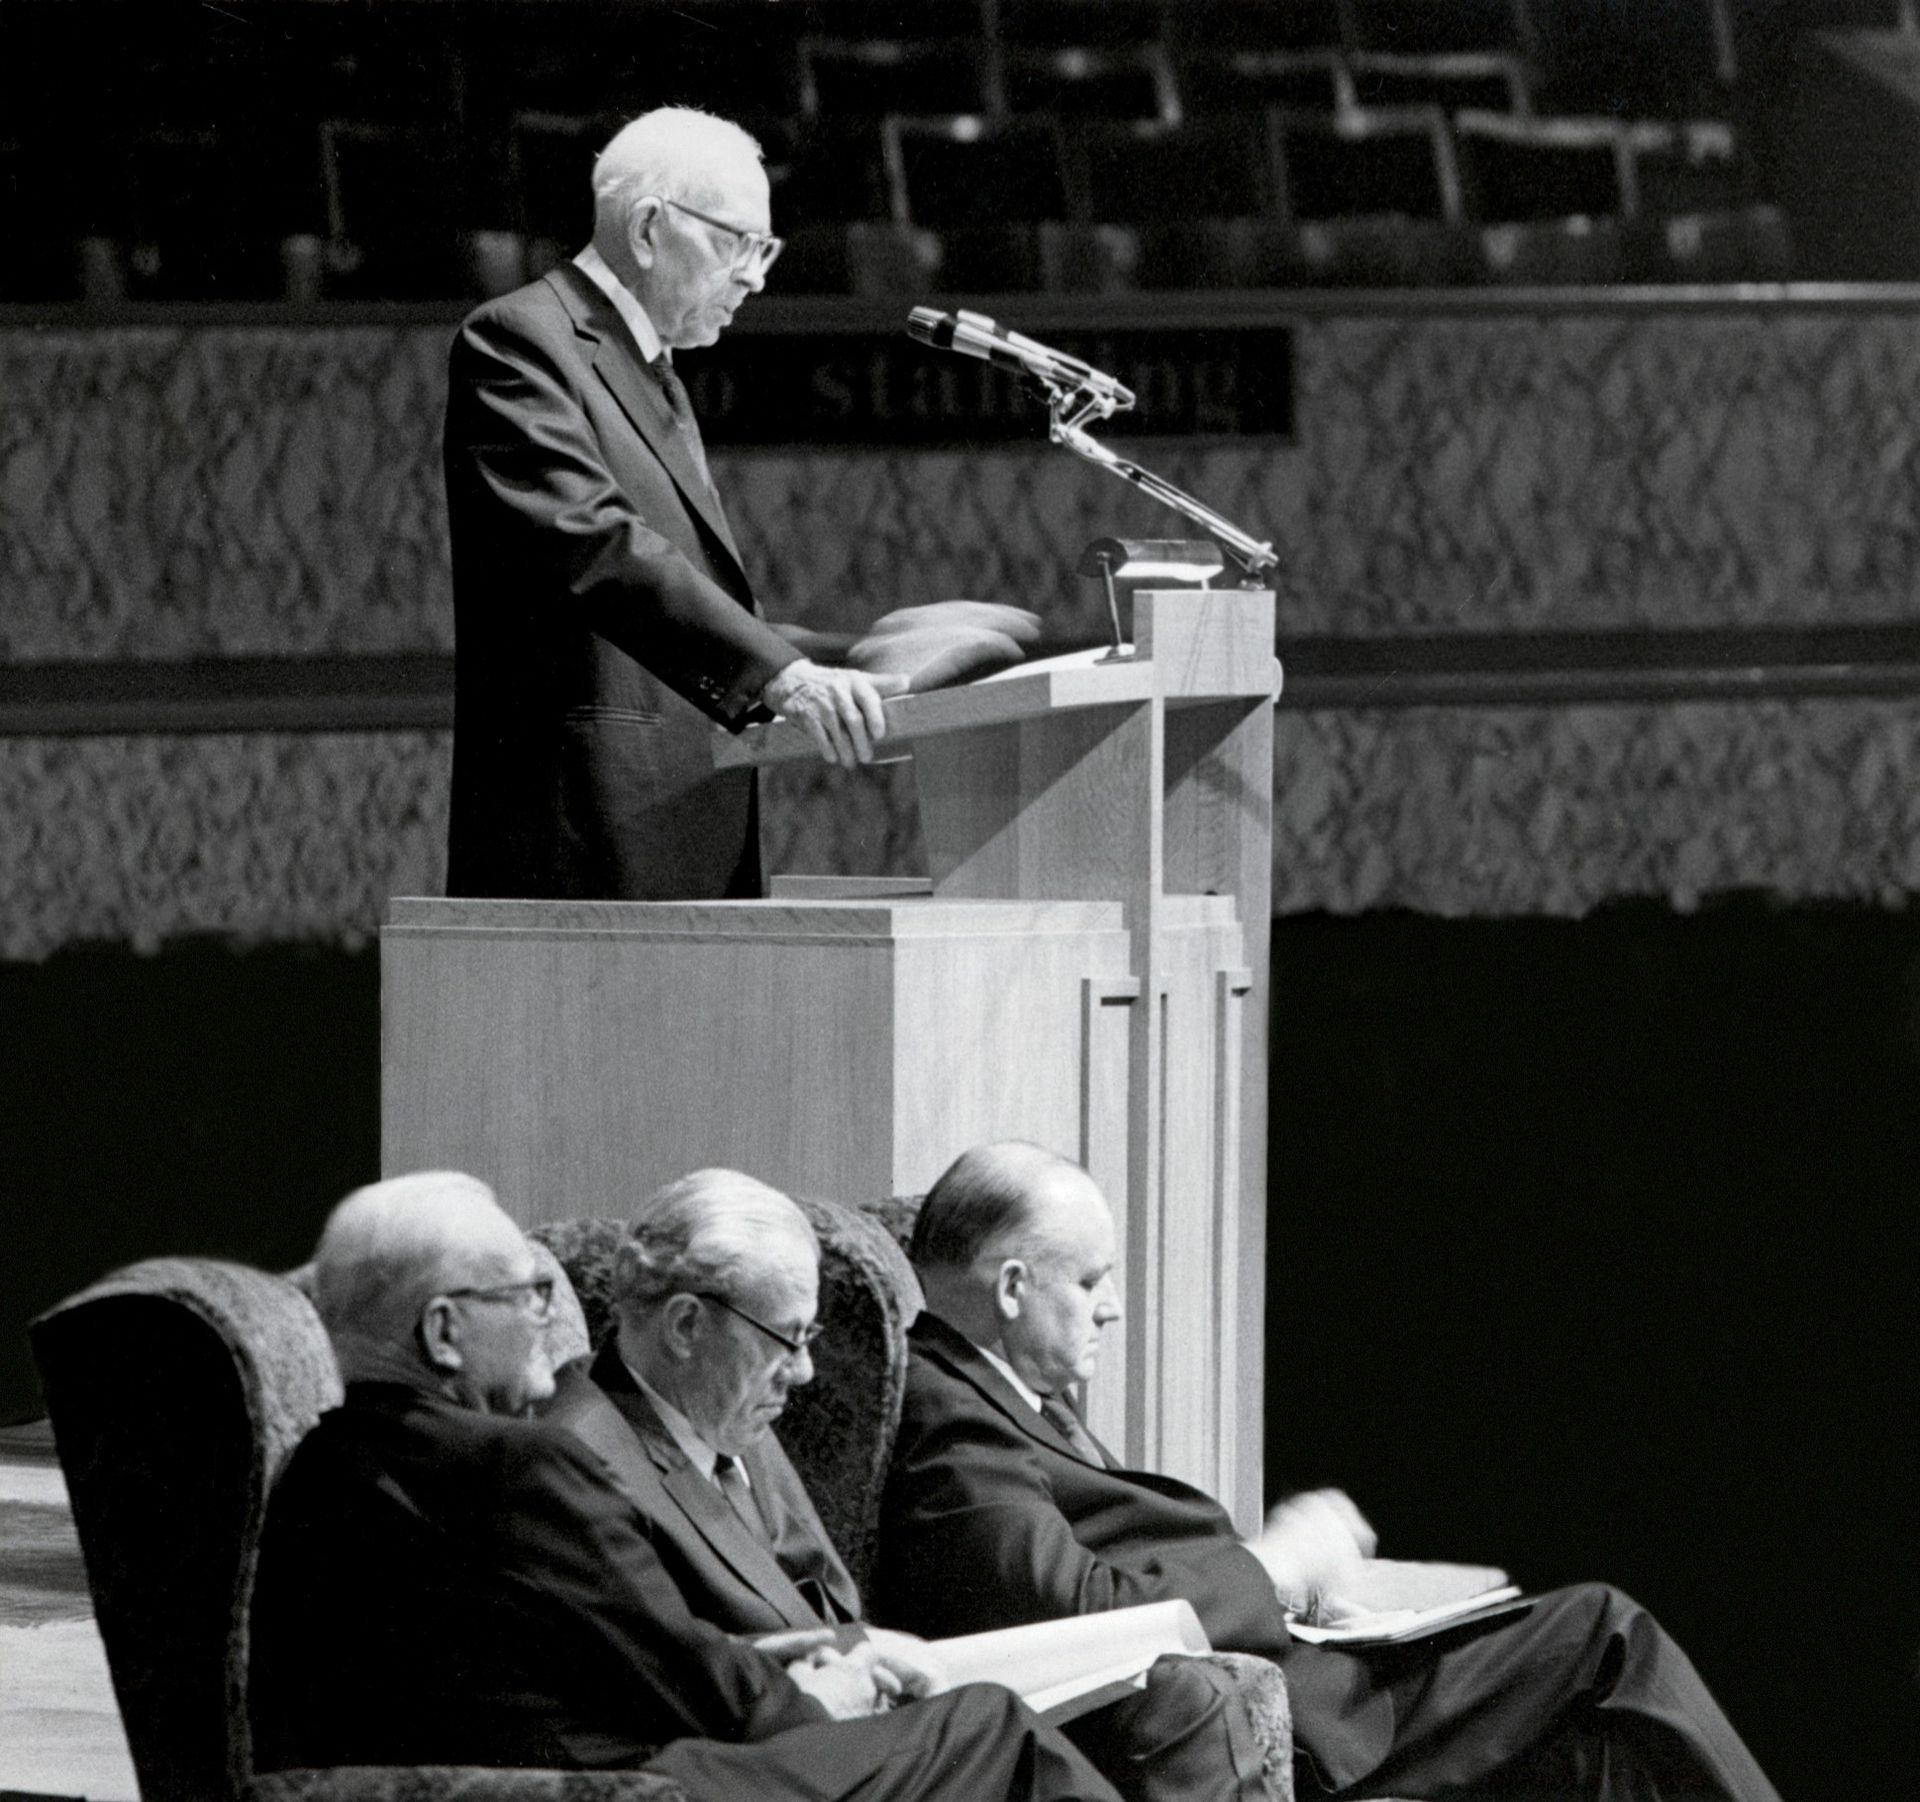 Joseph Fielding Smith standing and speaking at the Manchester area conference in 1971. Teachings of Presidents of the Church: Joseph Fielding Smith (2013), 162